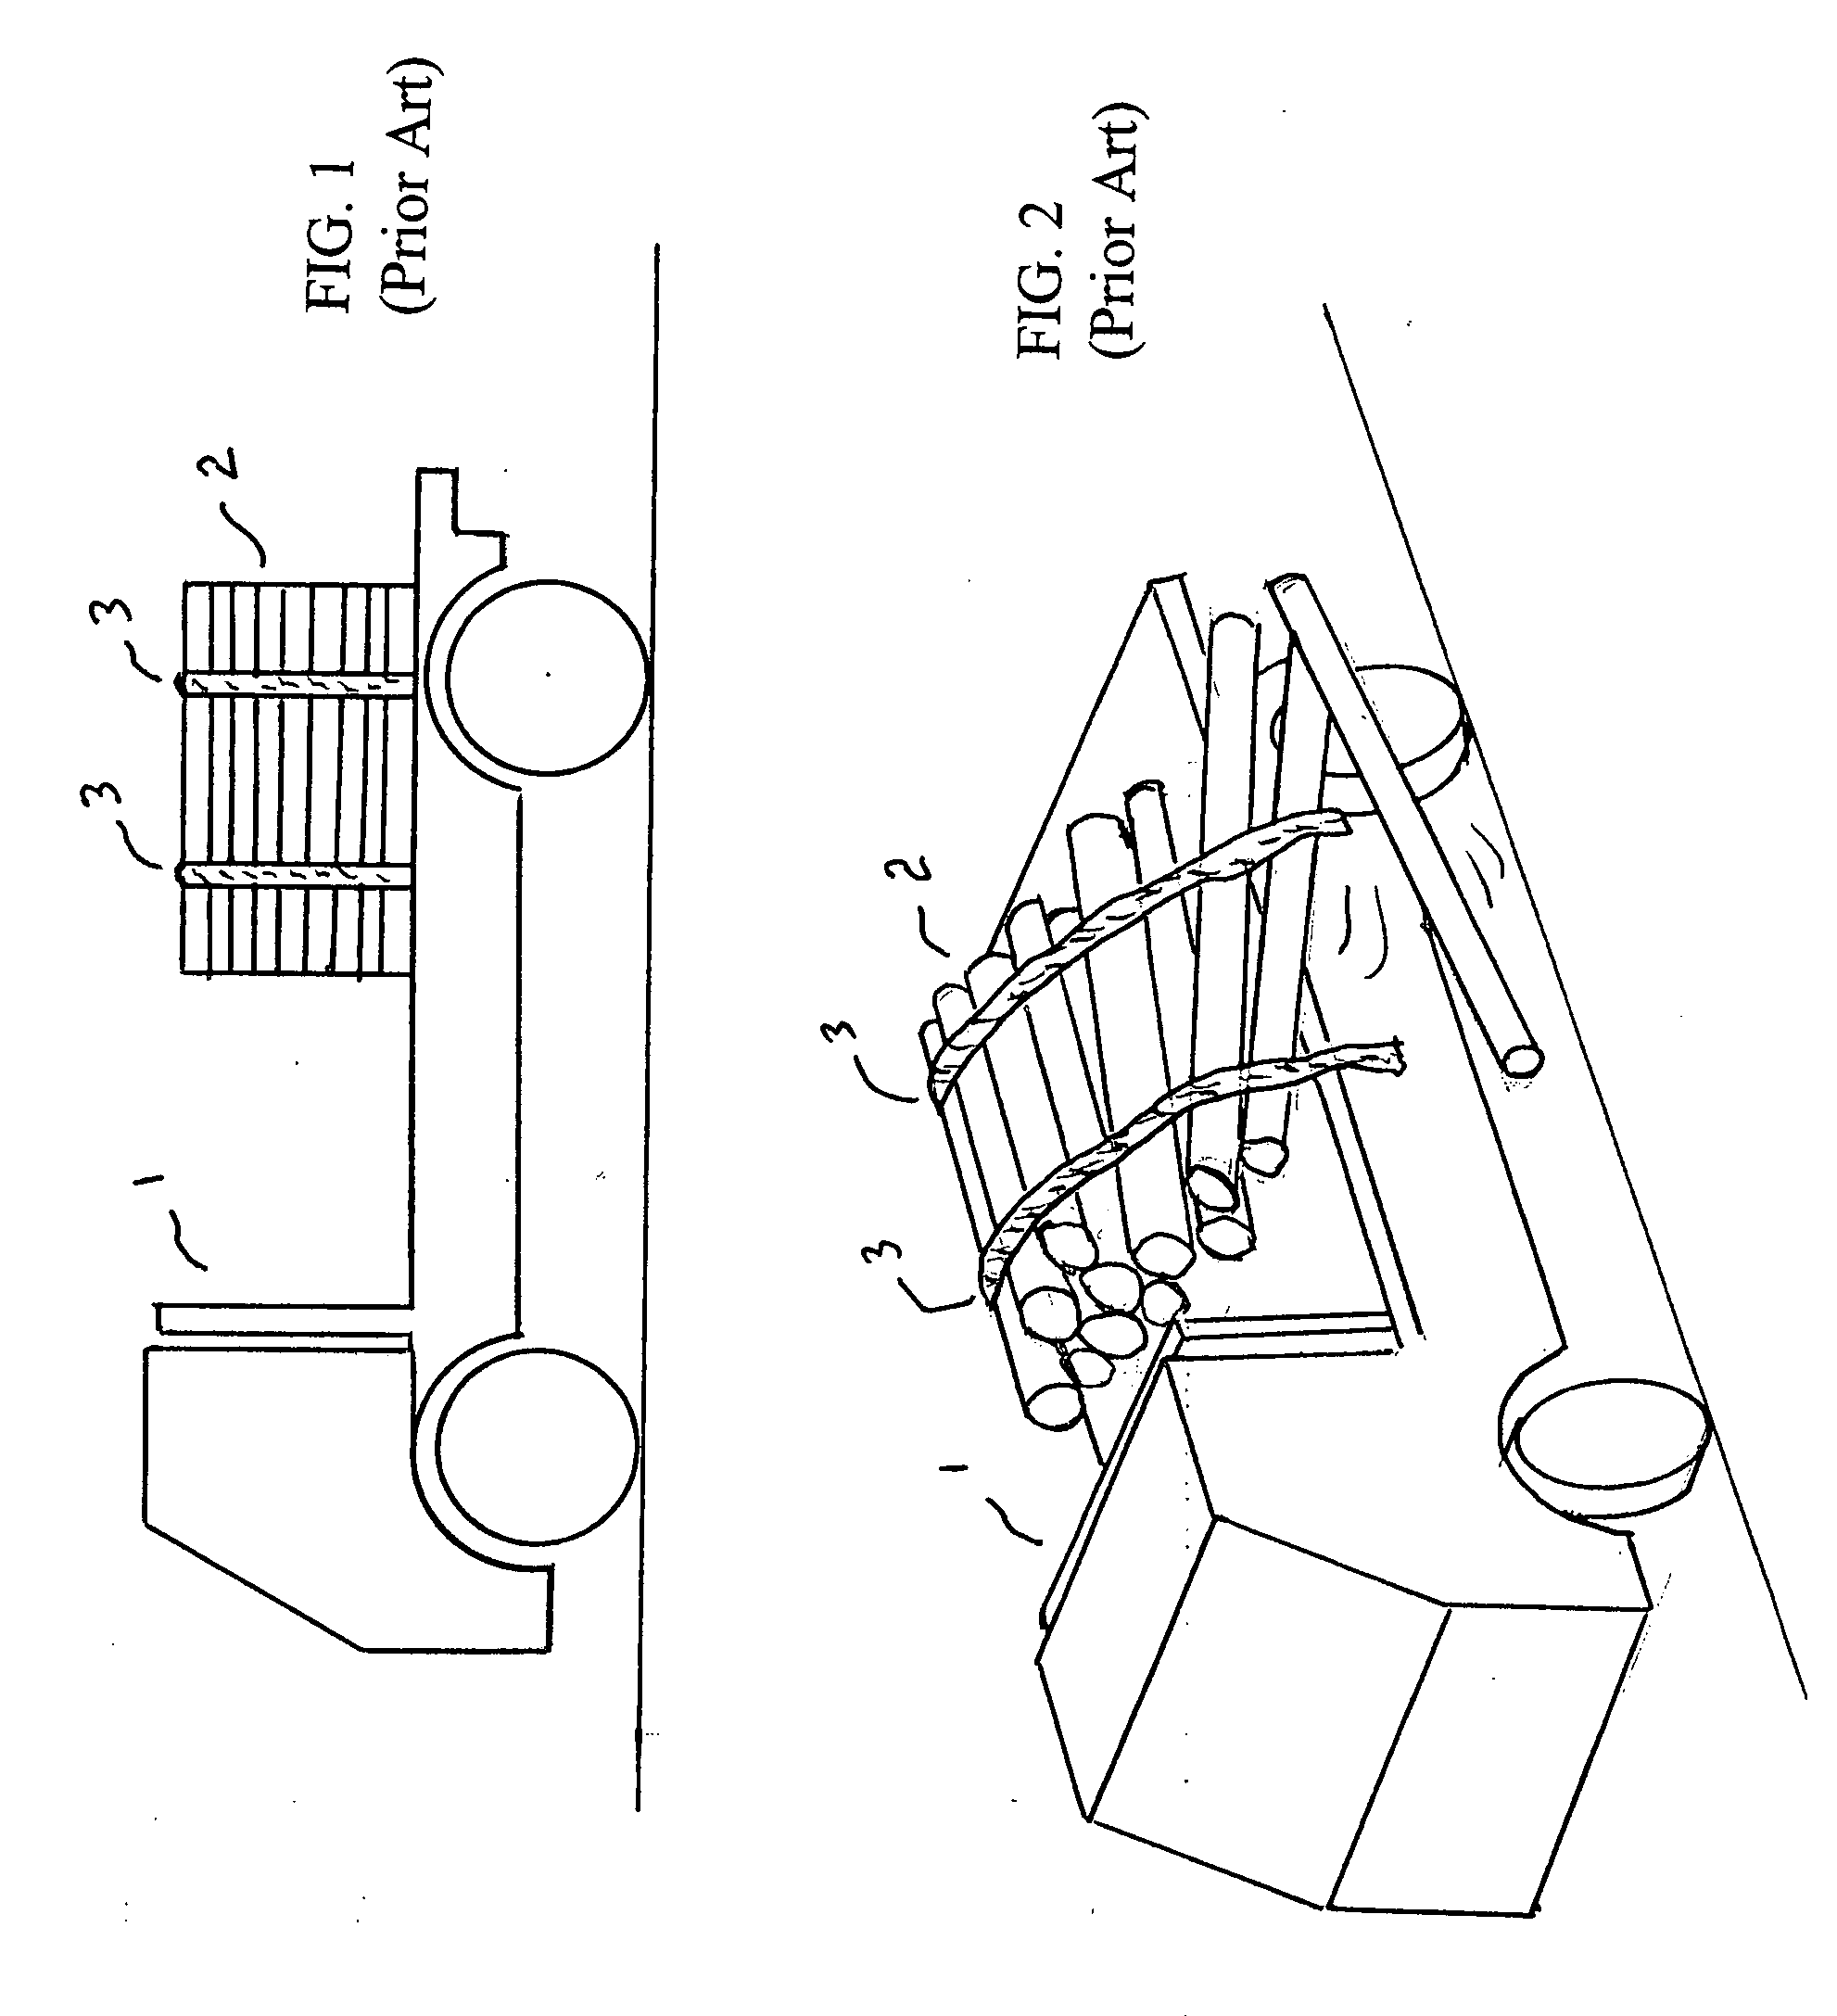 Chuck and lock system with extendable brace for preventing falling of flatbed truck loads